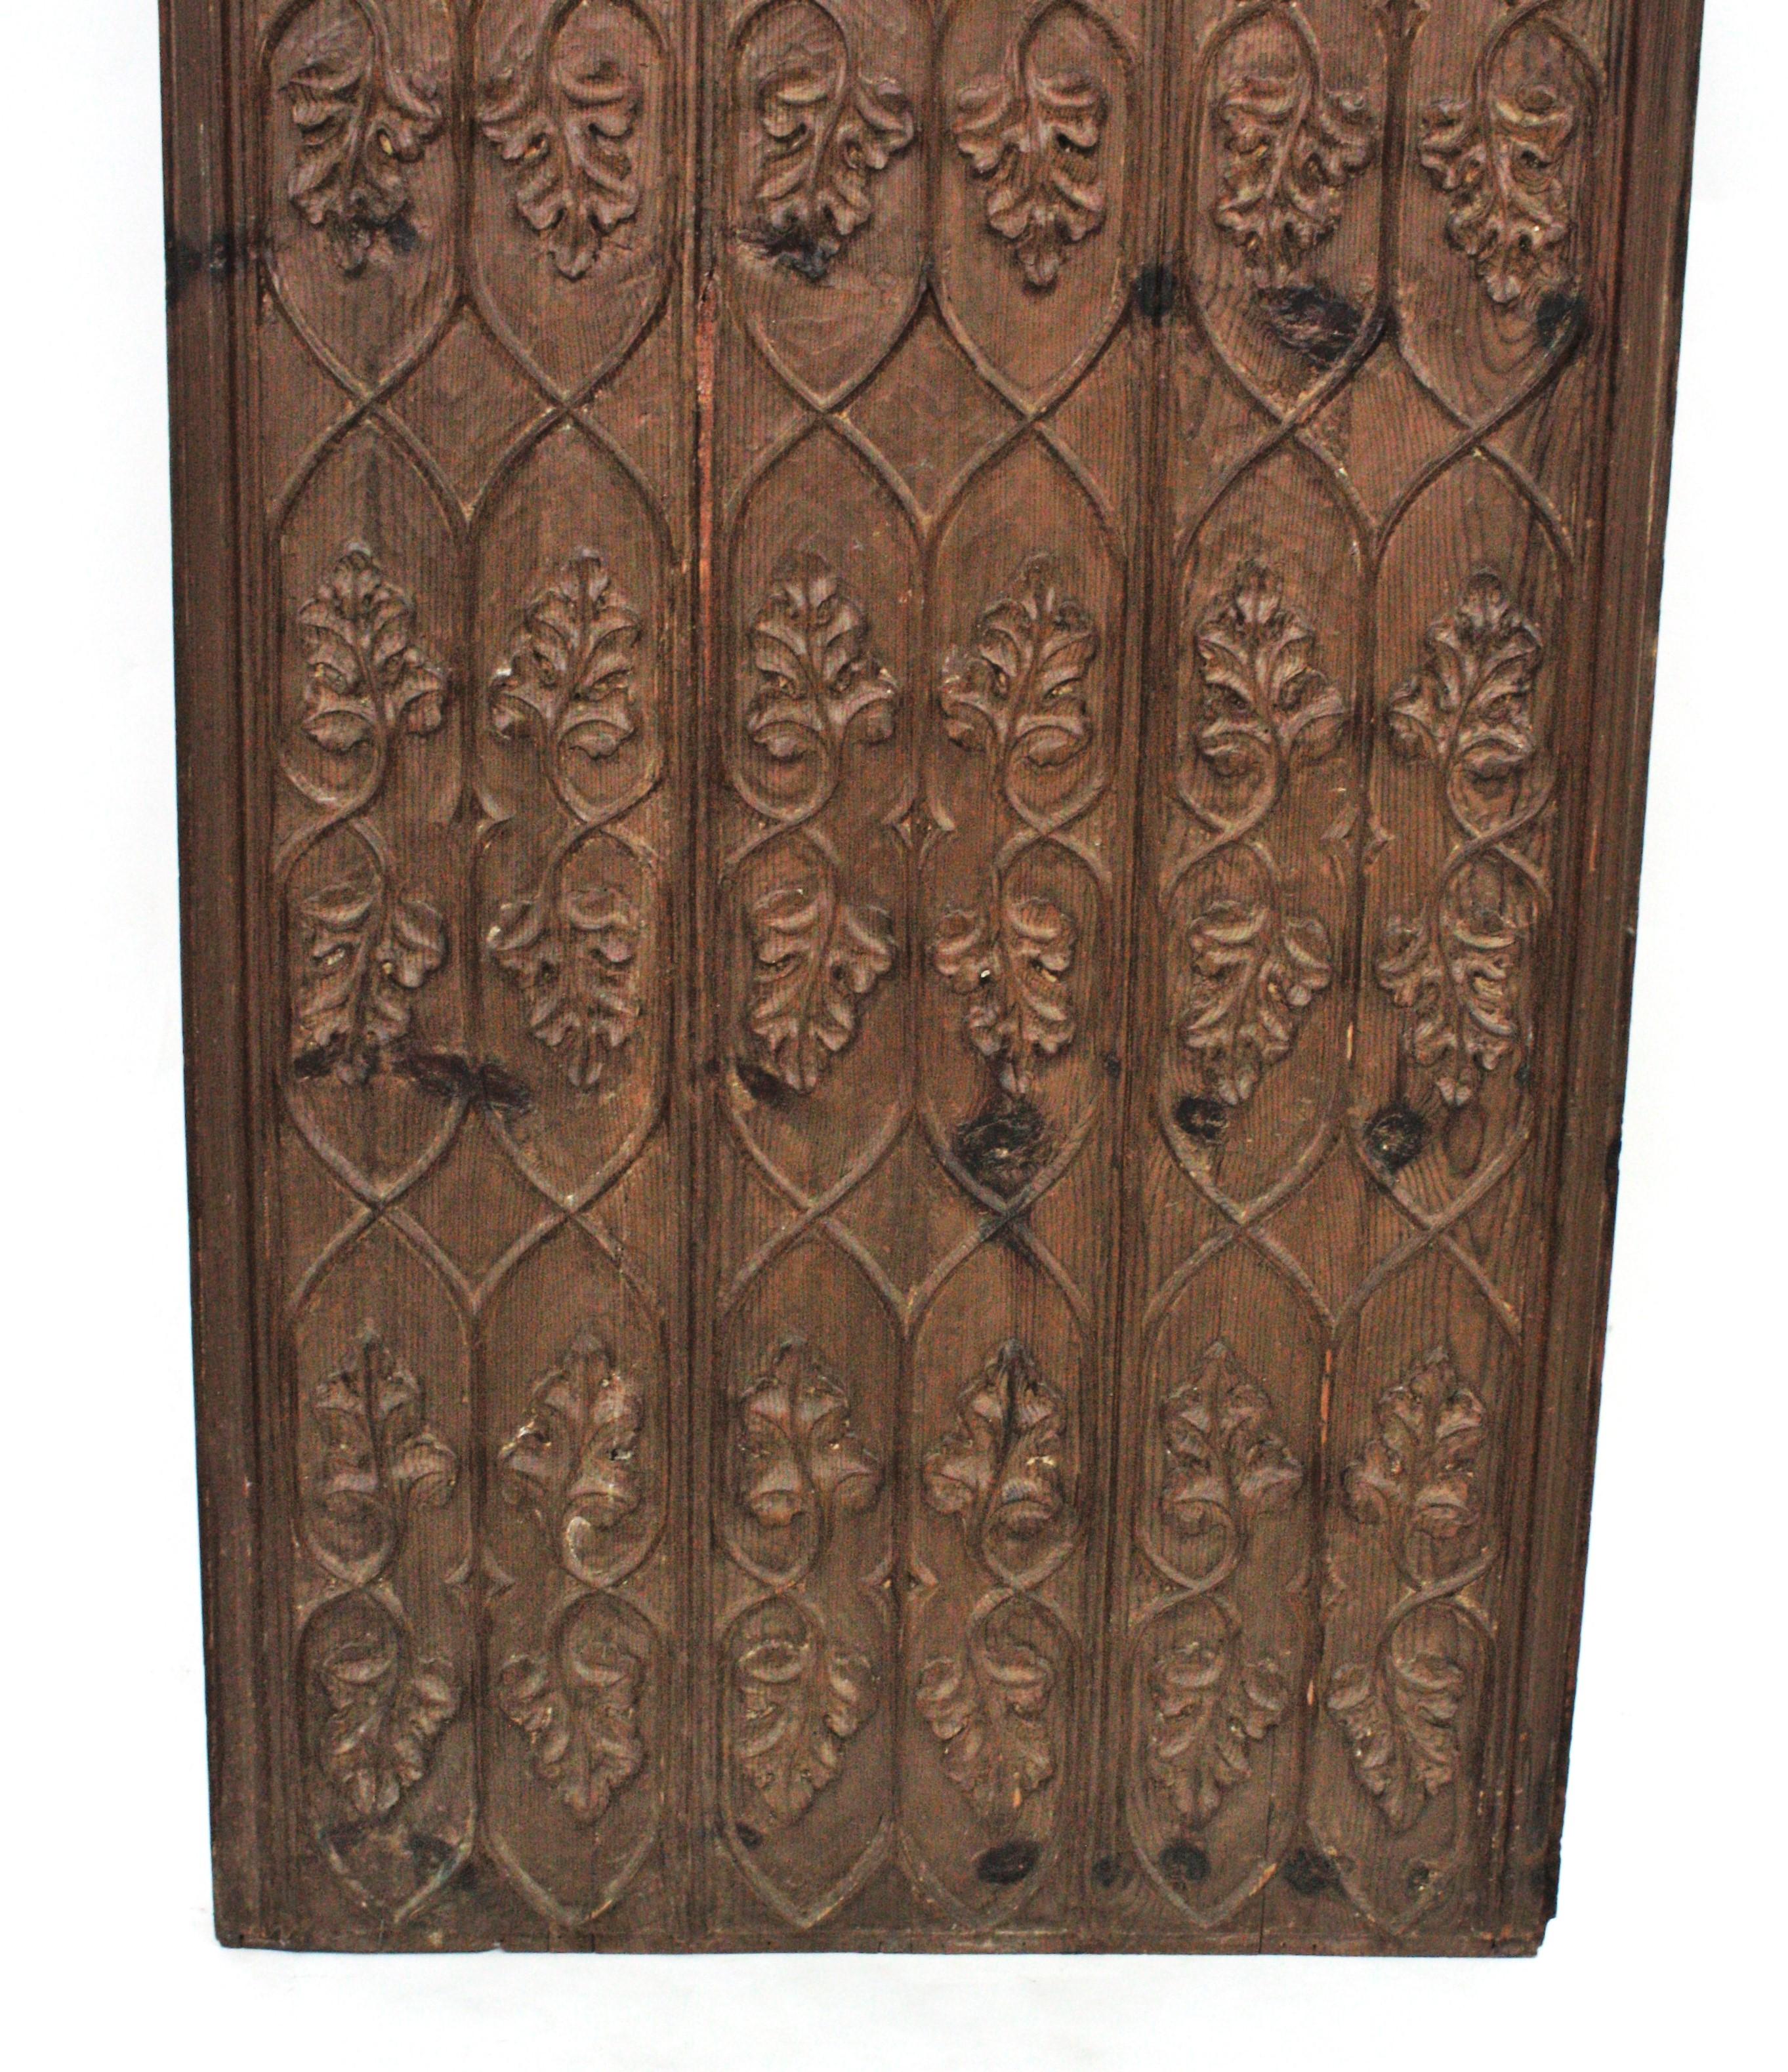 Spanish Hand-Carved Walnut Wood Decorative Wall Panel with Foliage Motifs For Sale 1